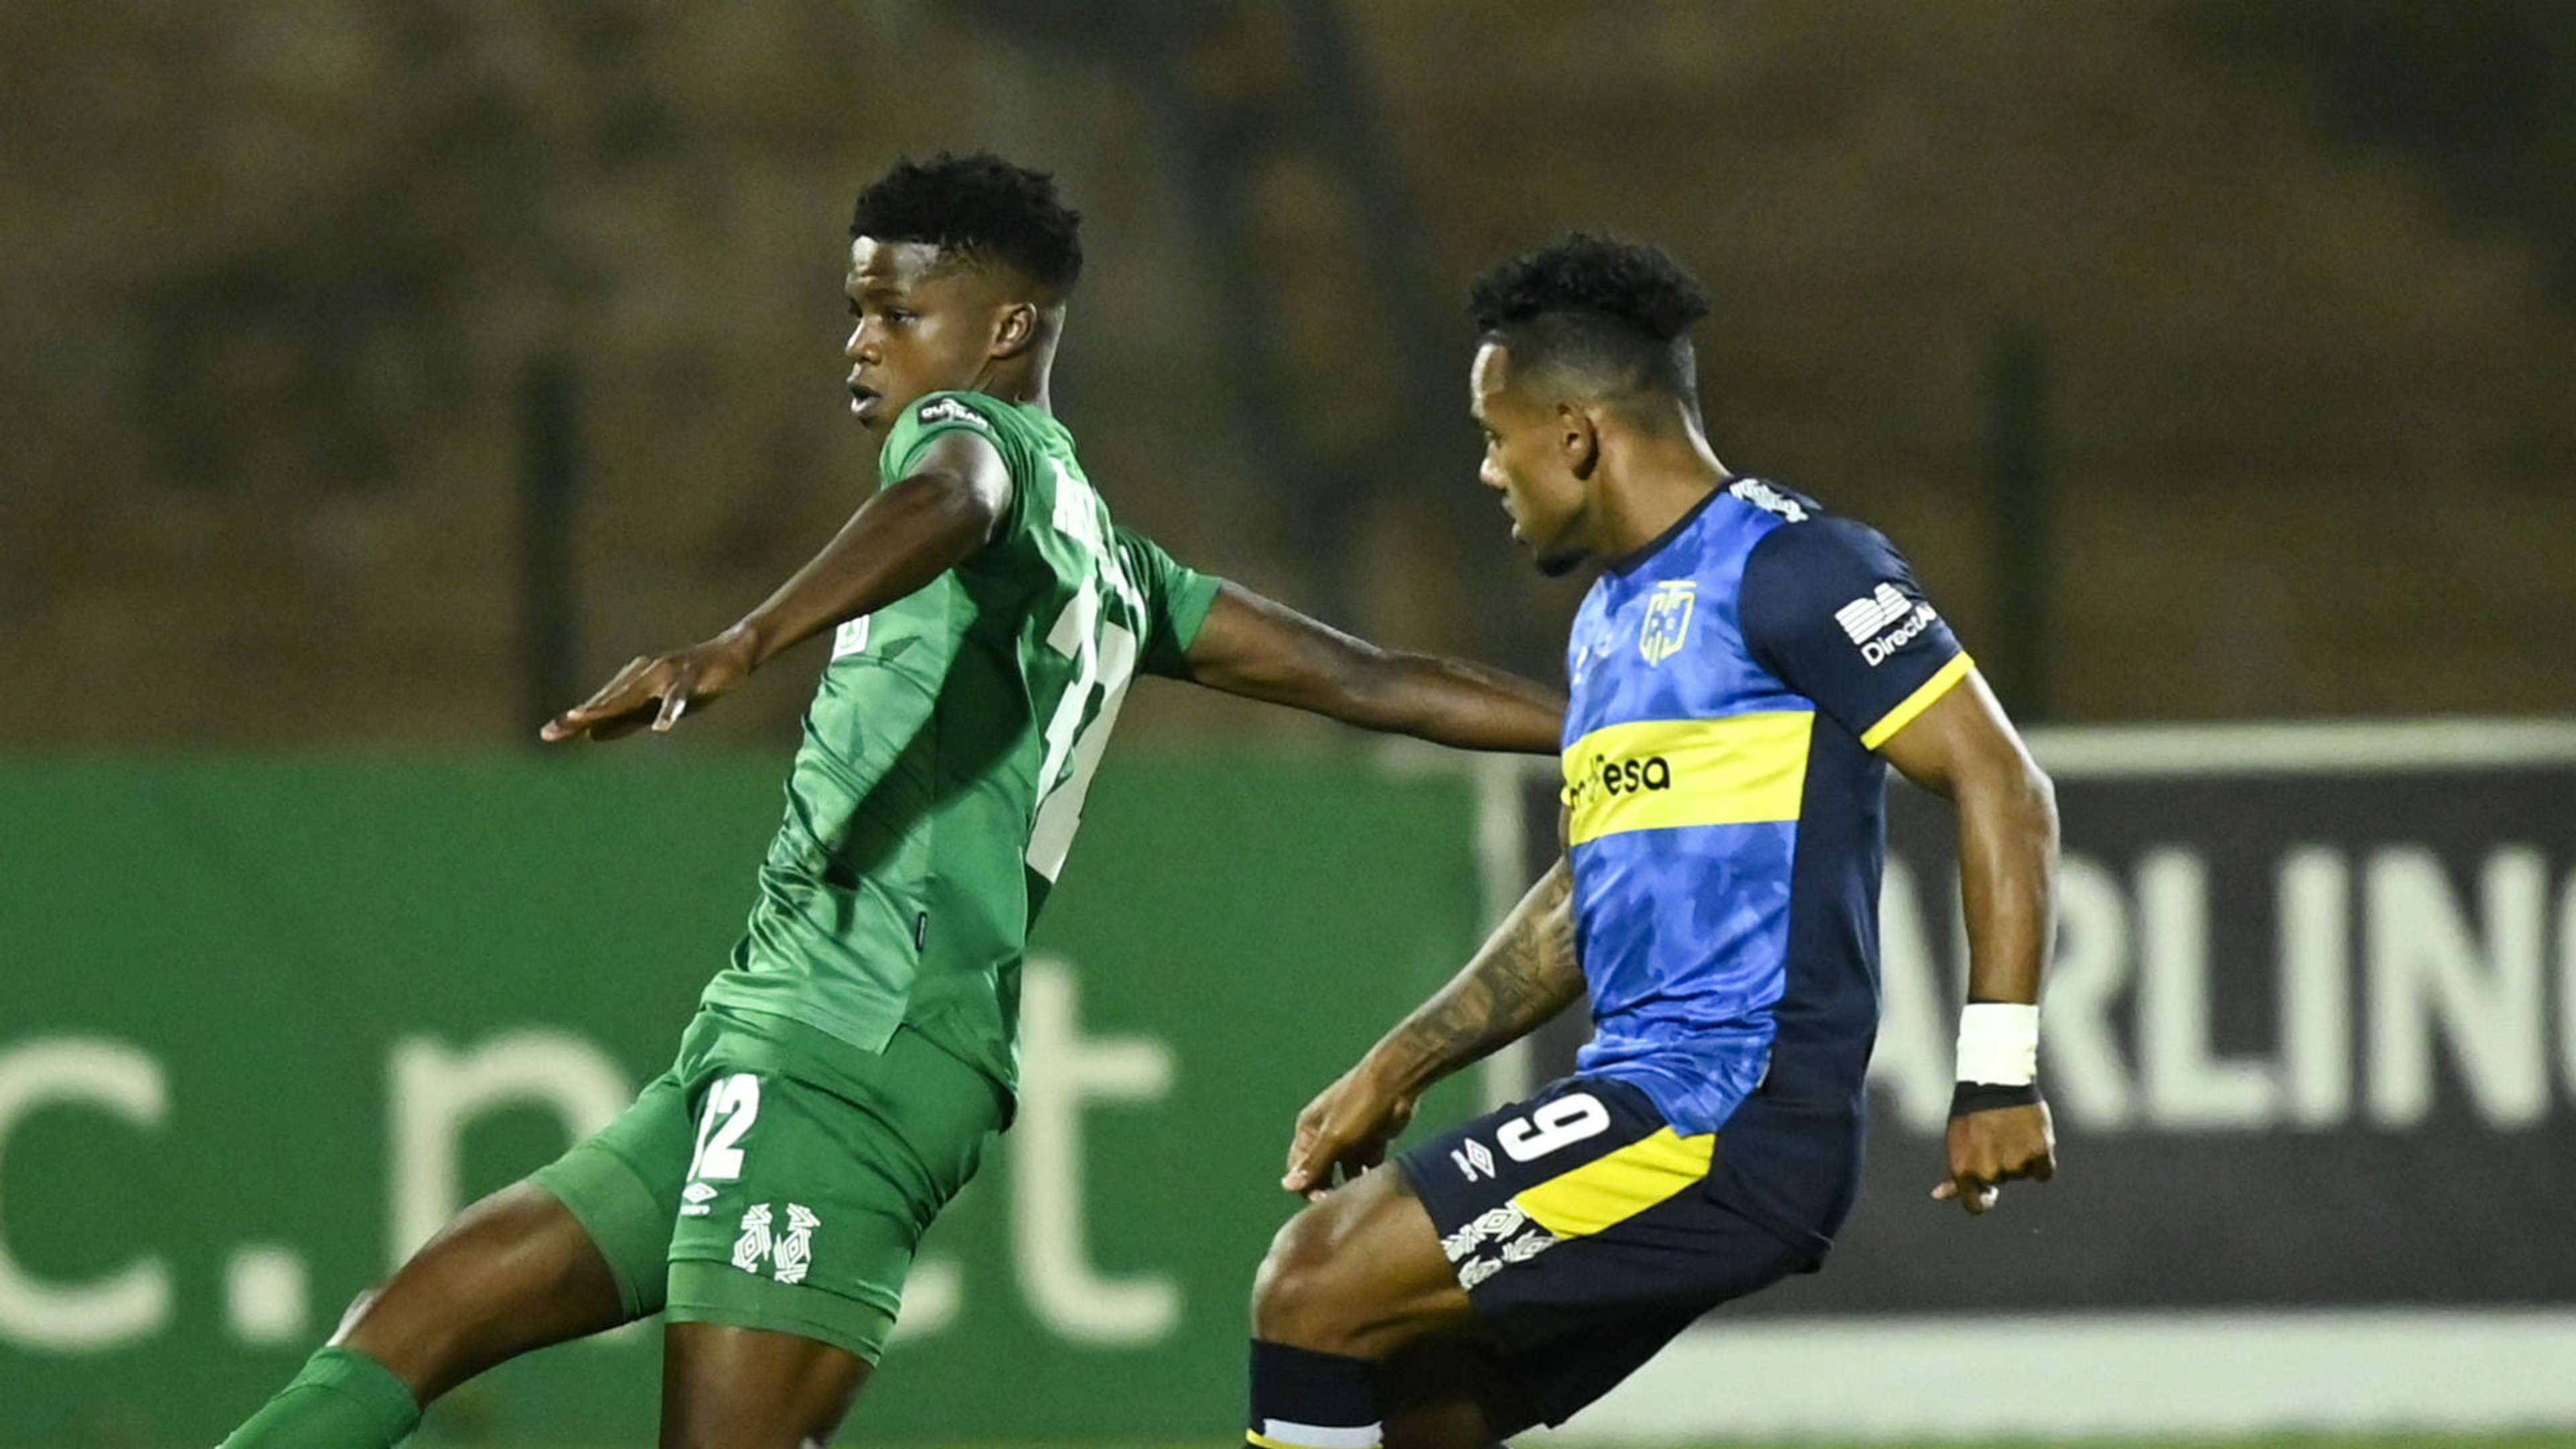 Sandile Khumalo of AmaZulu FC is challenged by Kermit Erasmus of Cape Town City FC, October 2019